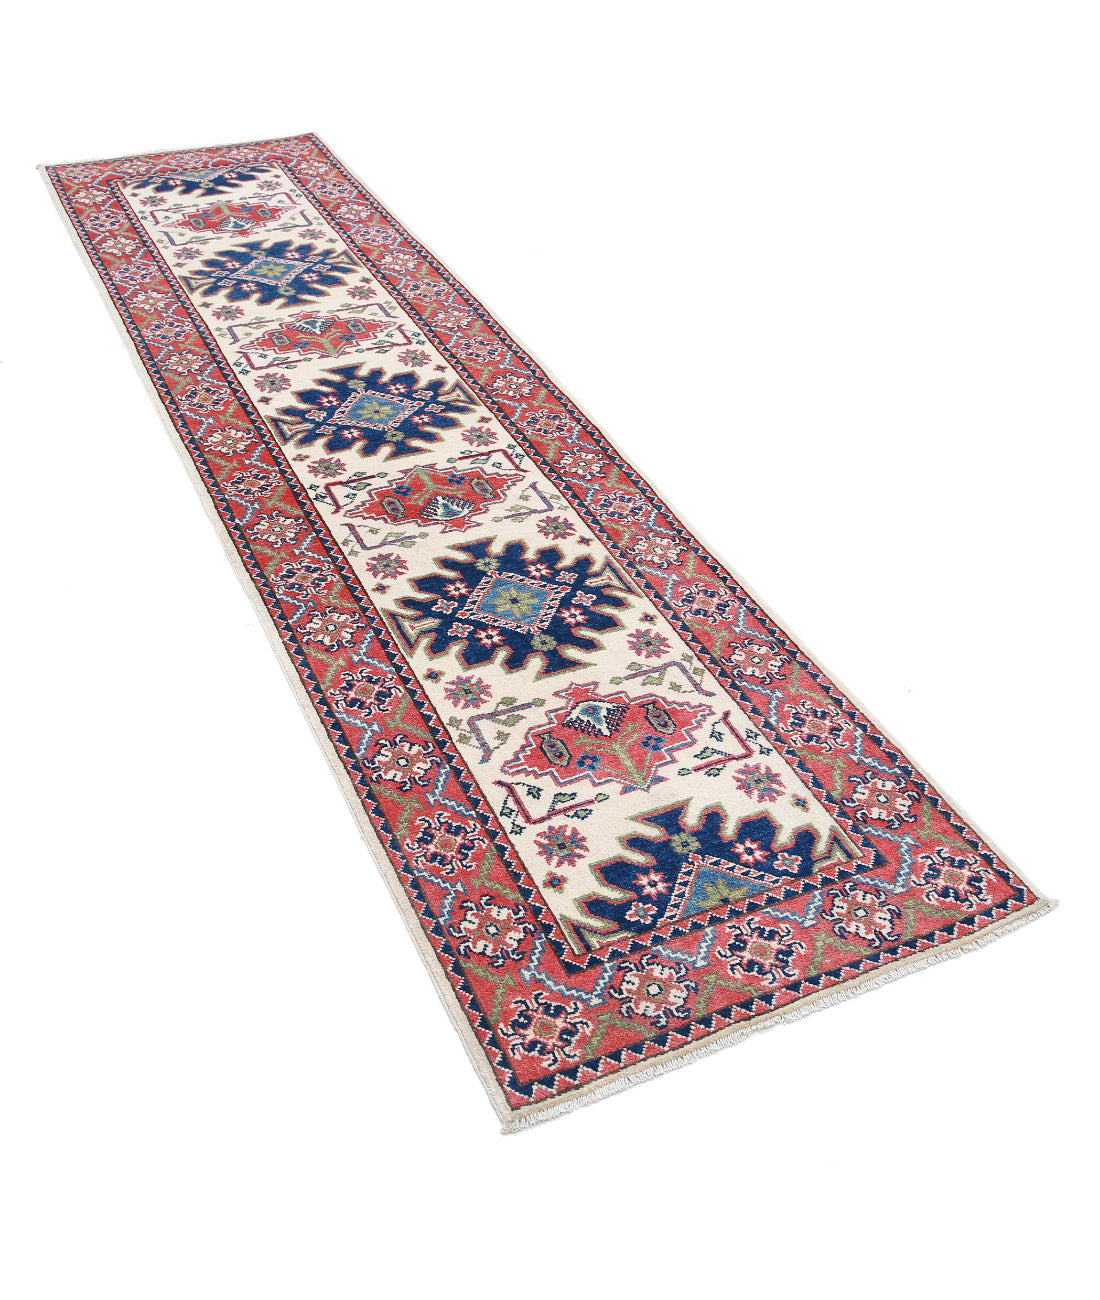 Hand Knotted Tribal Kazak Wool Rug - 2'6'' x 9'7'' 2'6'' x 9'7'' (75 X 288) / Ivory / Red